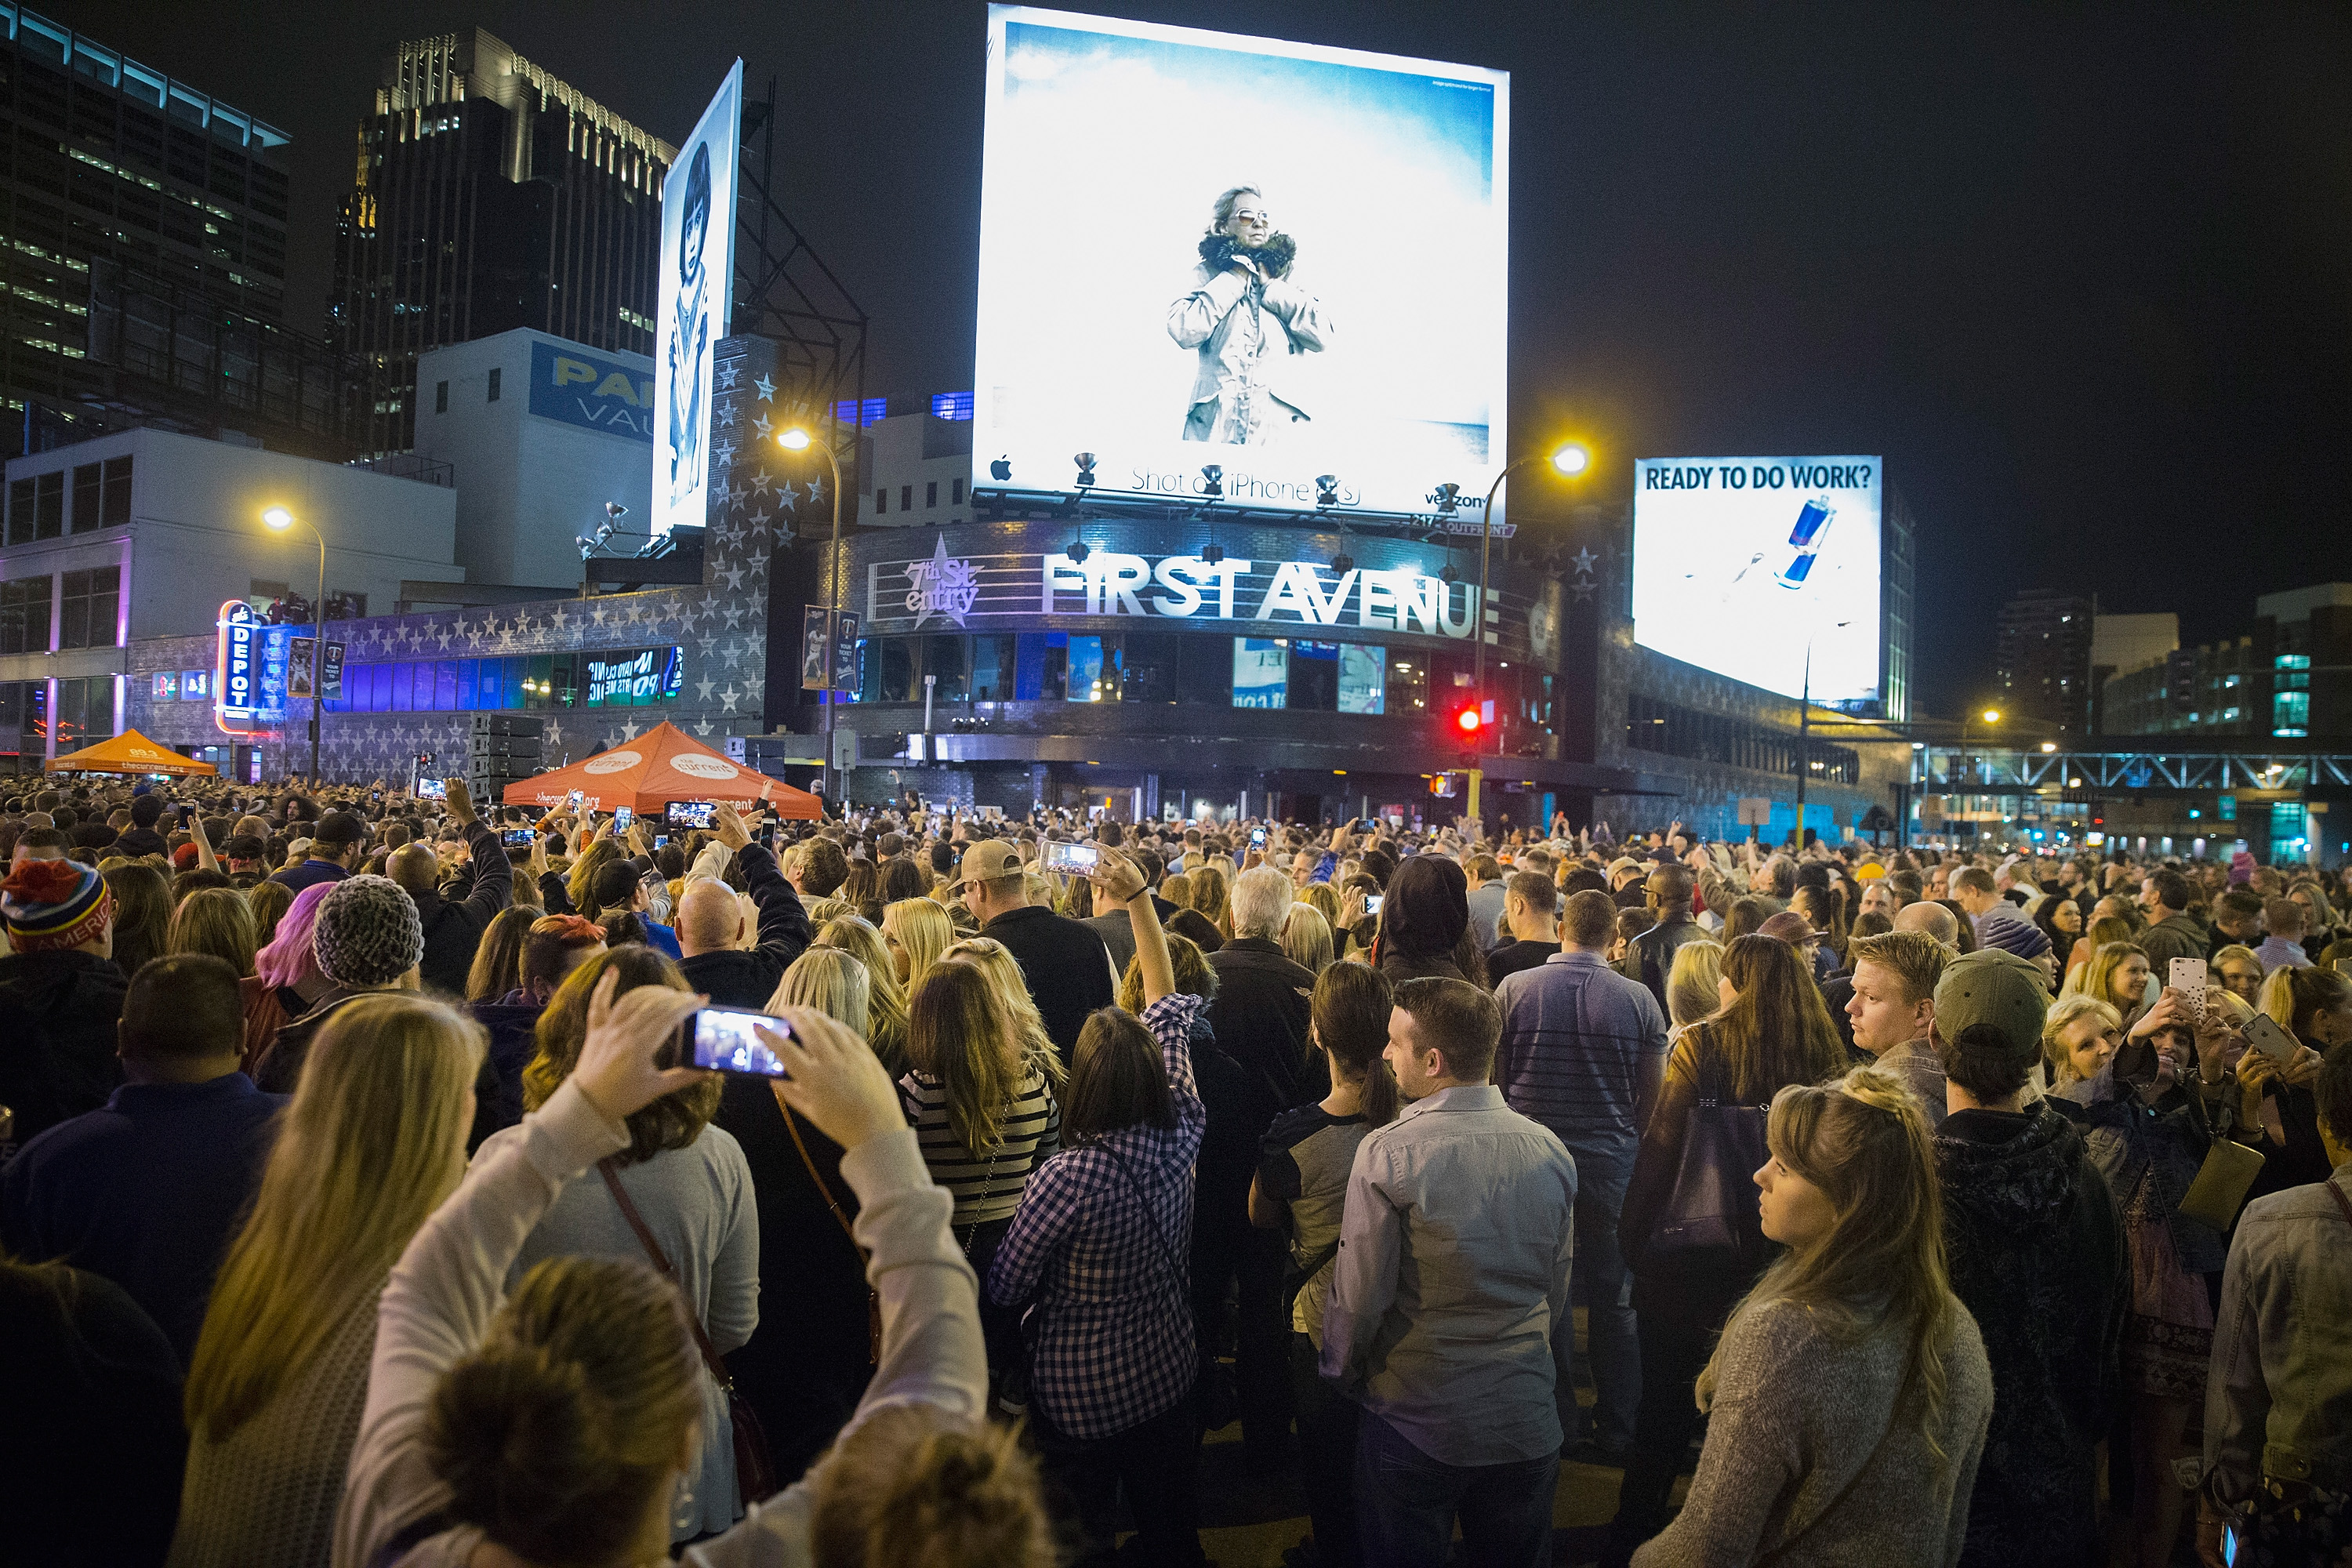 Fans gather to listen to Prince's music during a memorial street party outside the First Avenue nightclub in Minneapolis, Minnesota on April 21, 2016 | Source: Getty Images